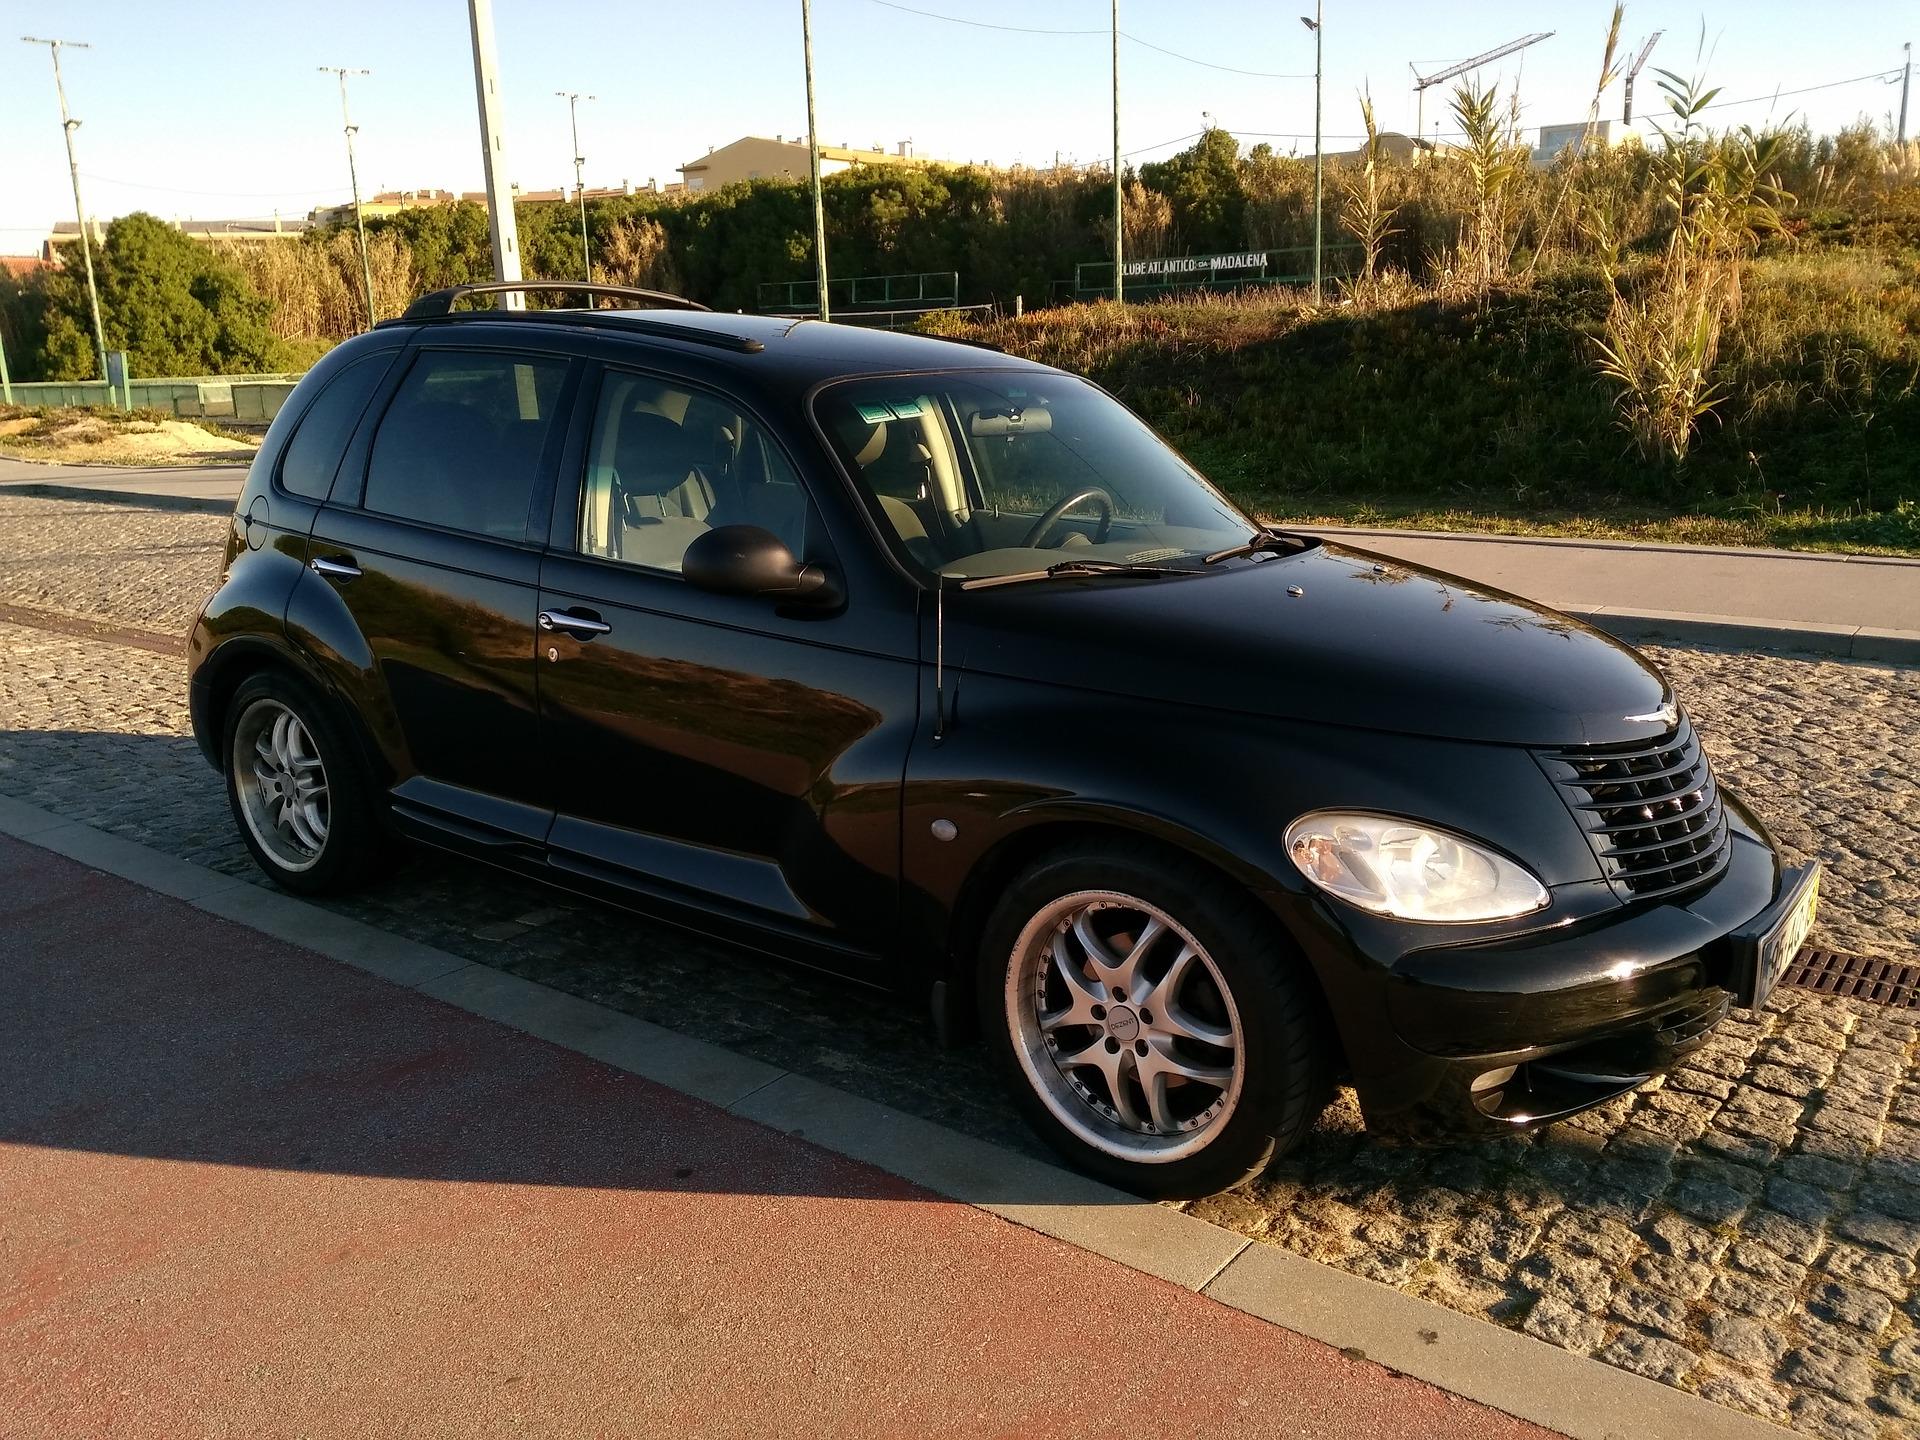 Folks love to hate it, but the PT Cruiser has plenty of loyal fans.